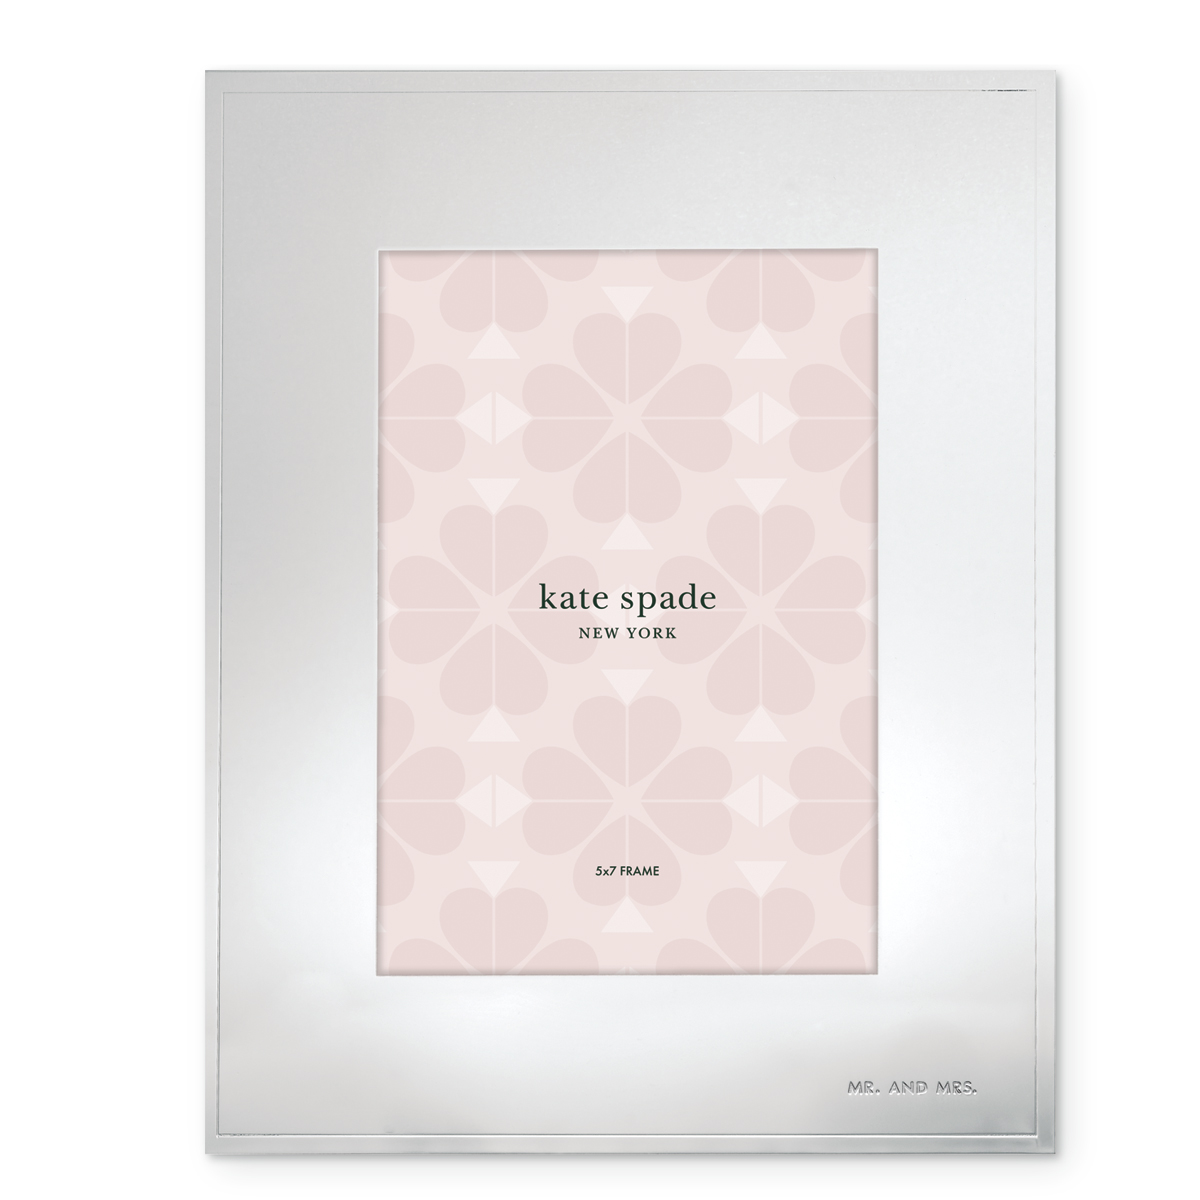 Kate Spade New York, Lenox Darling Point 5x7" Picture Frame